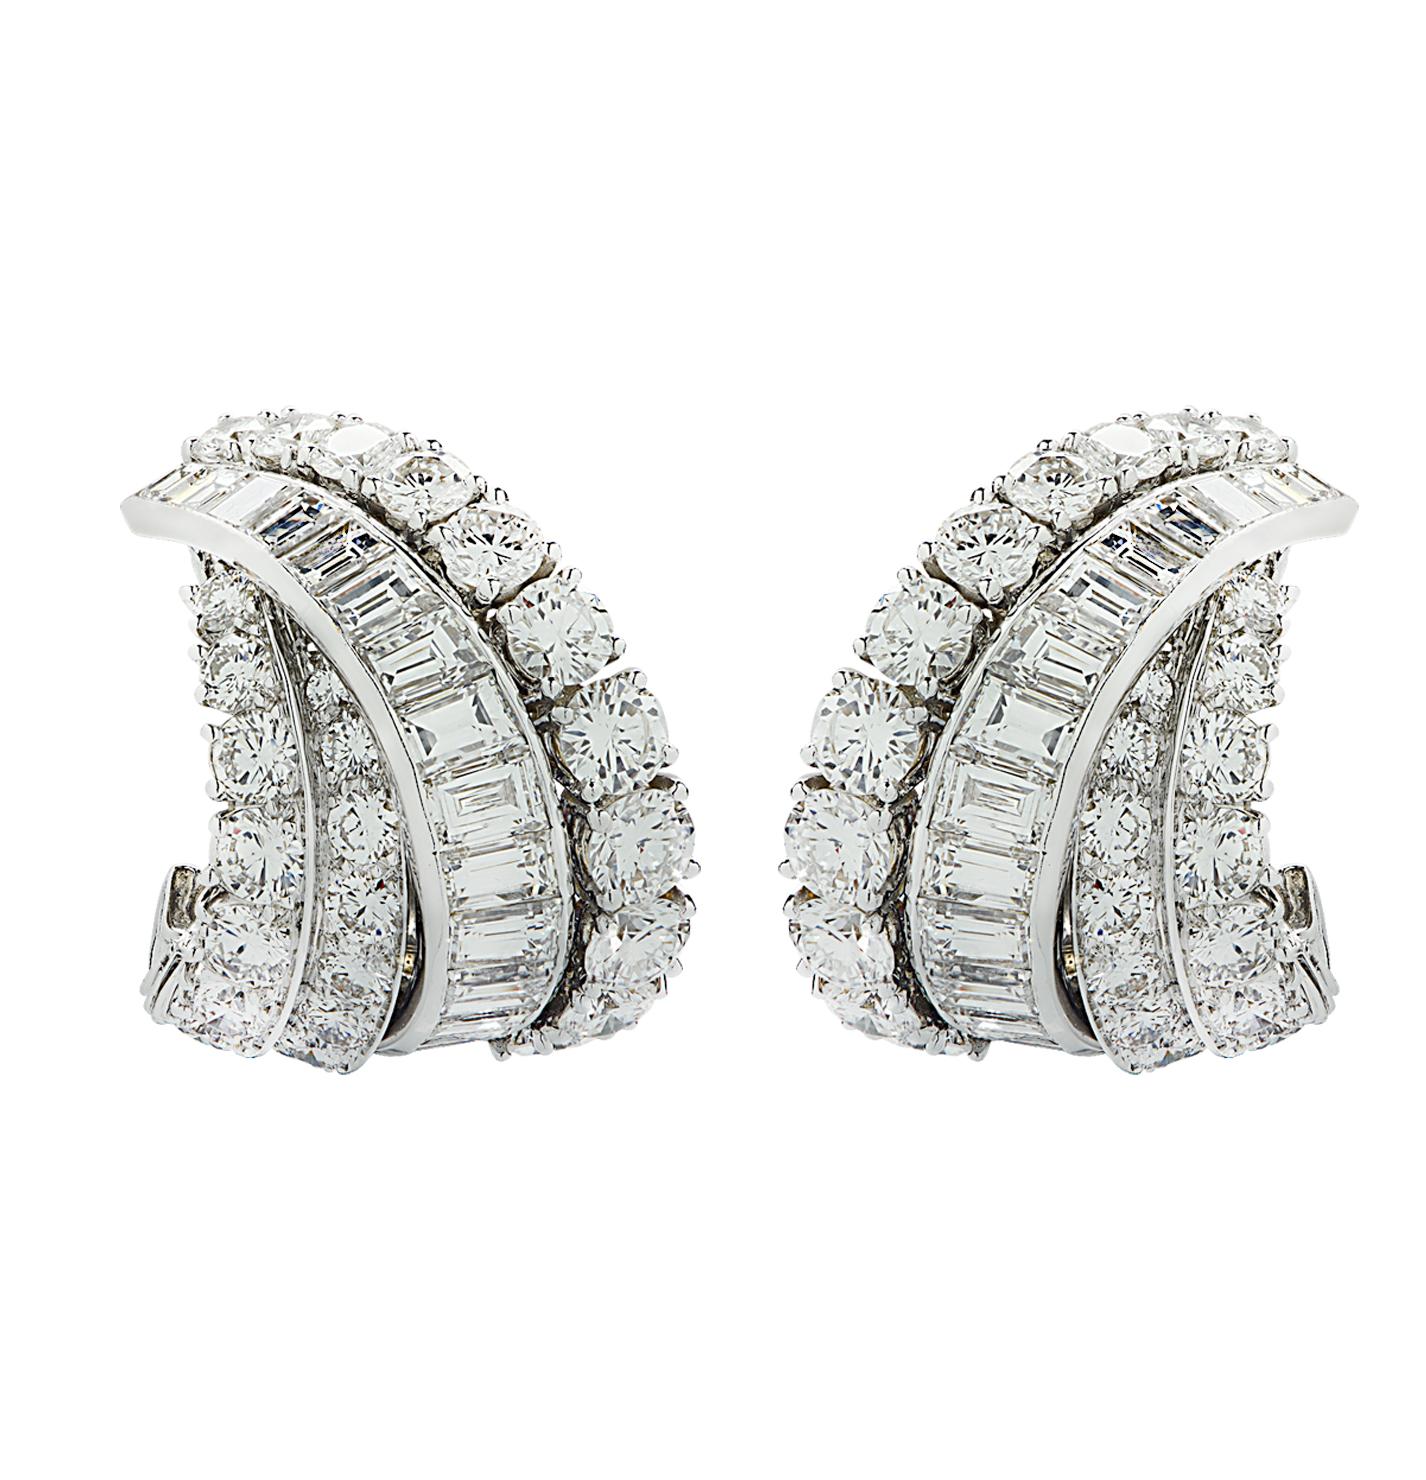 Hailing from the prestigious French Maison of Van Cleef & Arpels, these circa 1970 earrings are a testament to timeless elegance and the artistry of fine jewelry making. Each earring is masterfully crafted from 18k white gold

 

The design features